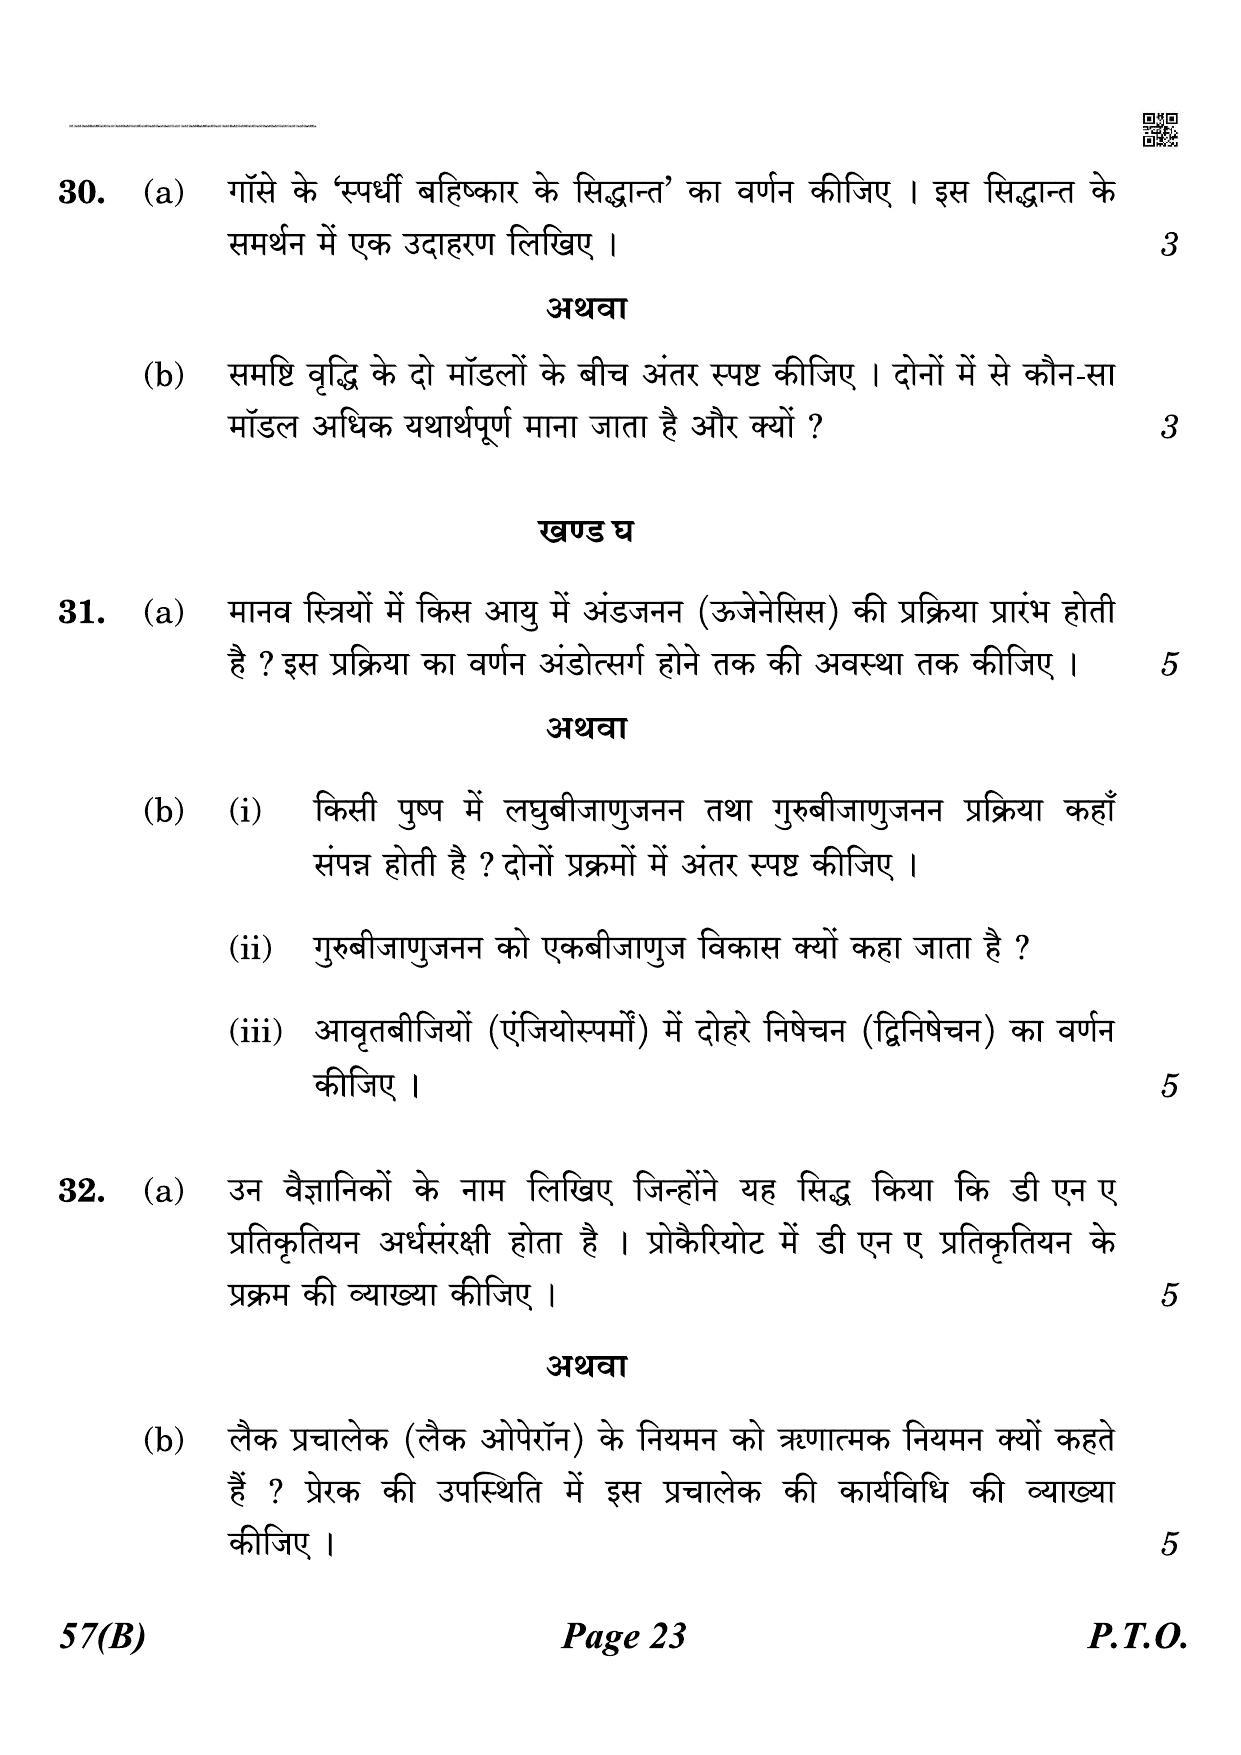 CBSE Class 12 QP_044_biology_for_visually_impared_candidates 2021 Compartment Question Paper - Page 23